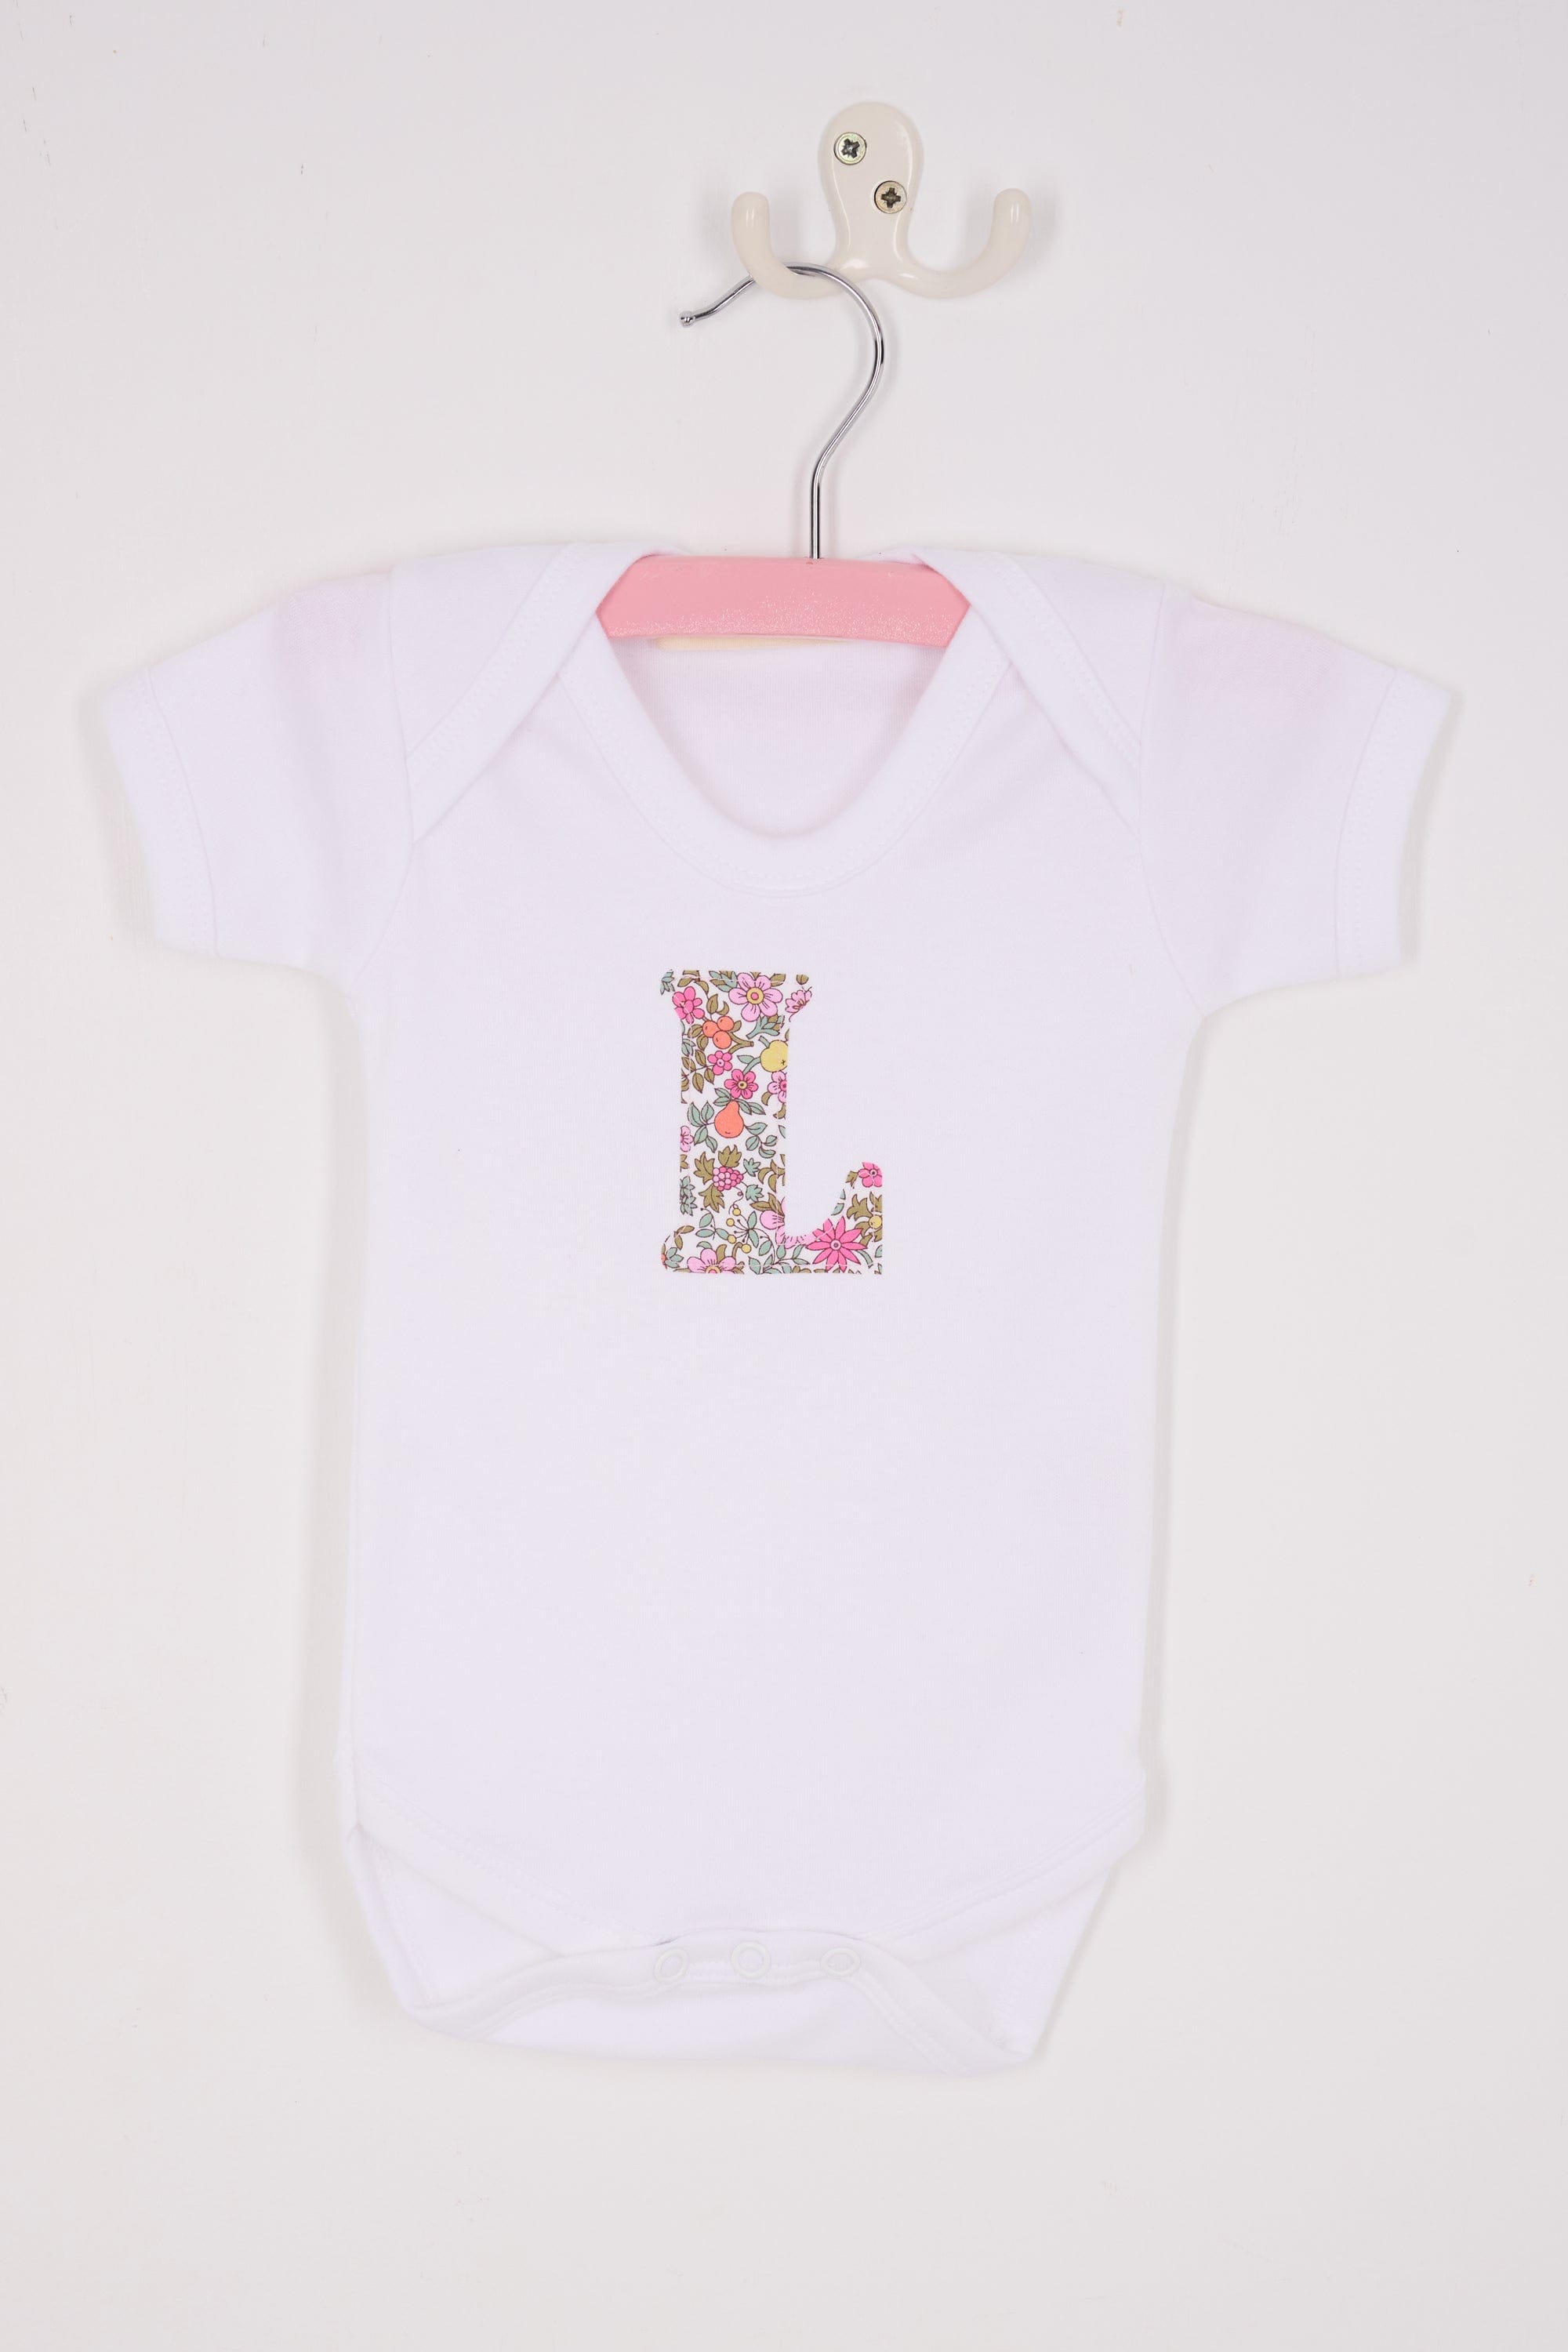 Magnificent Stanley Bodysuit Personalised Bodysuit in Fruit Punch Liberty Print